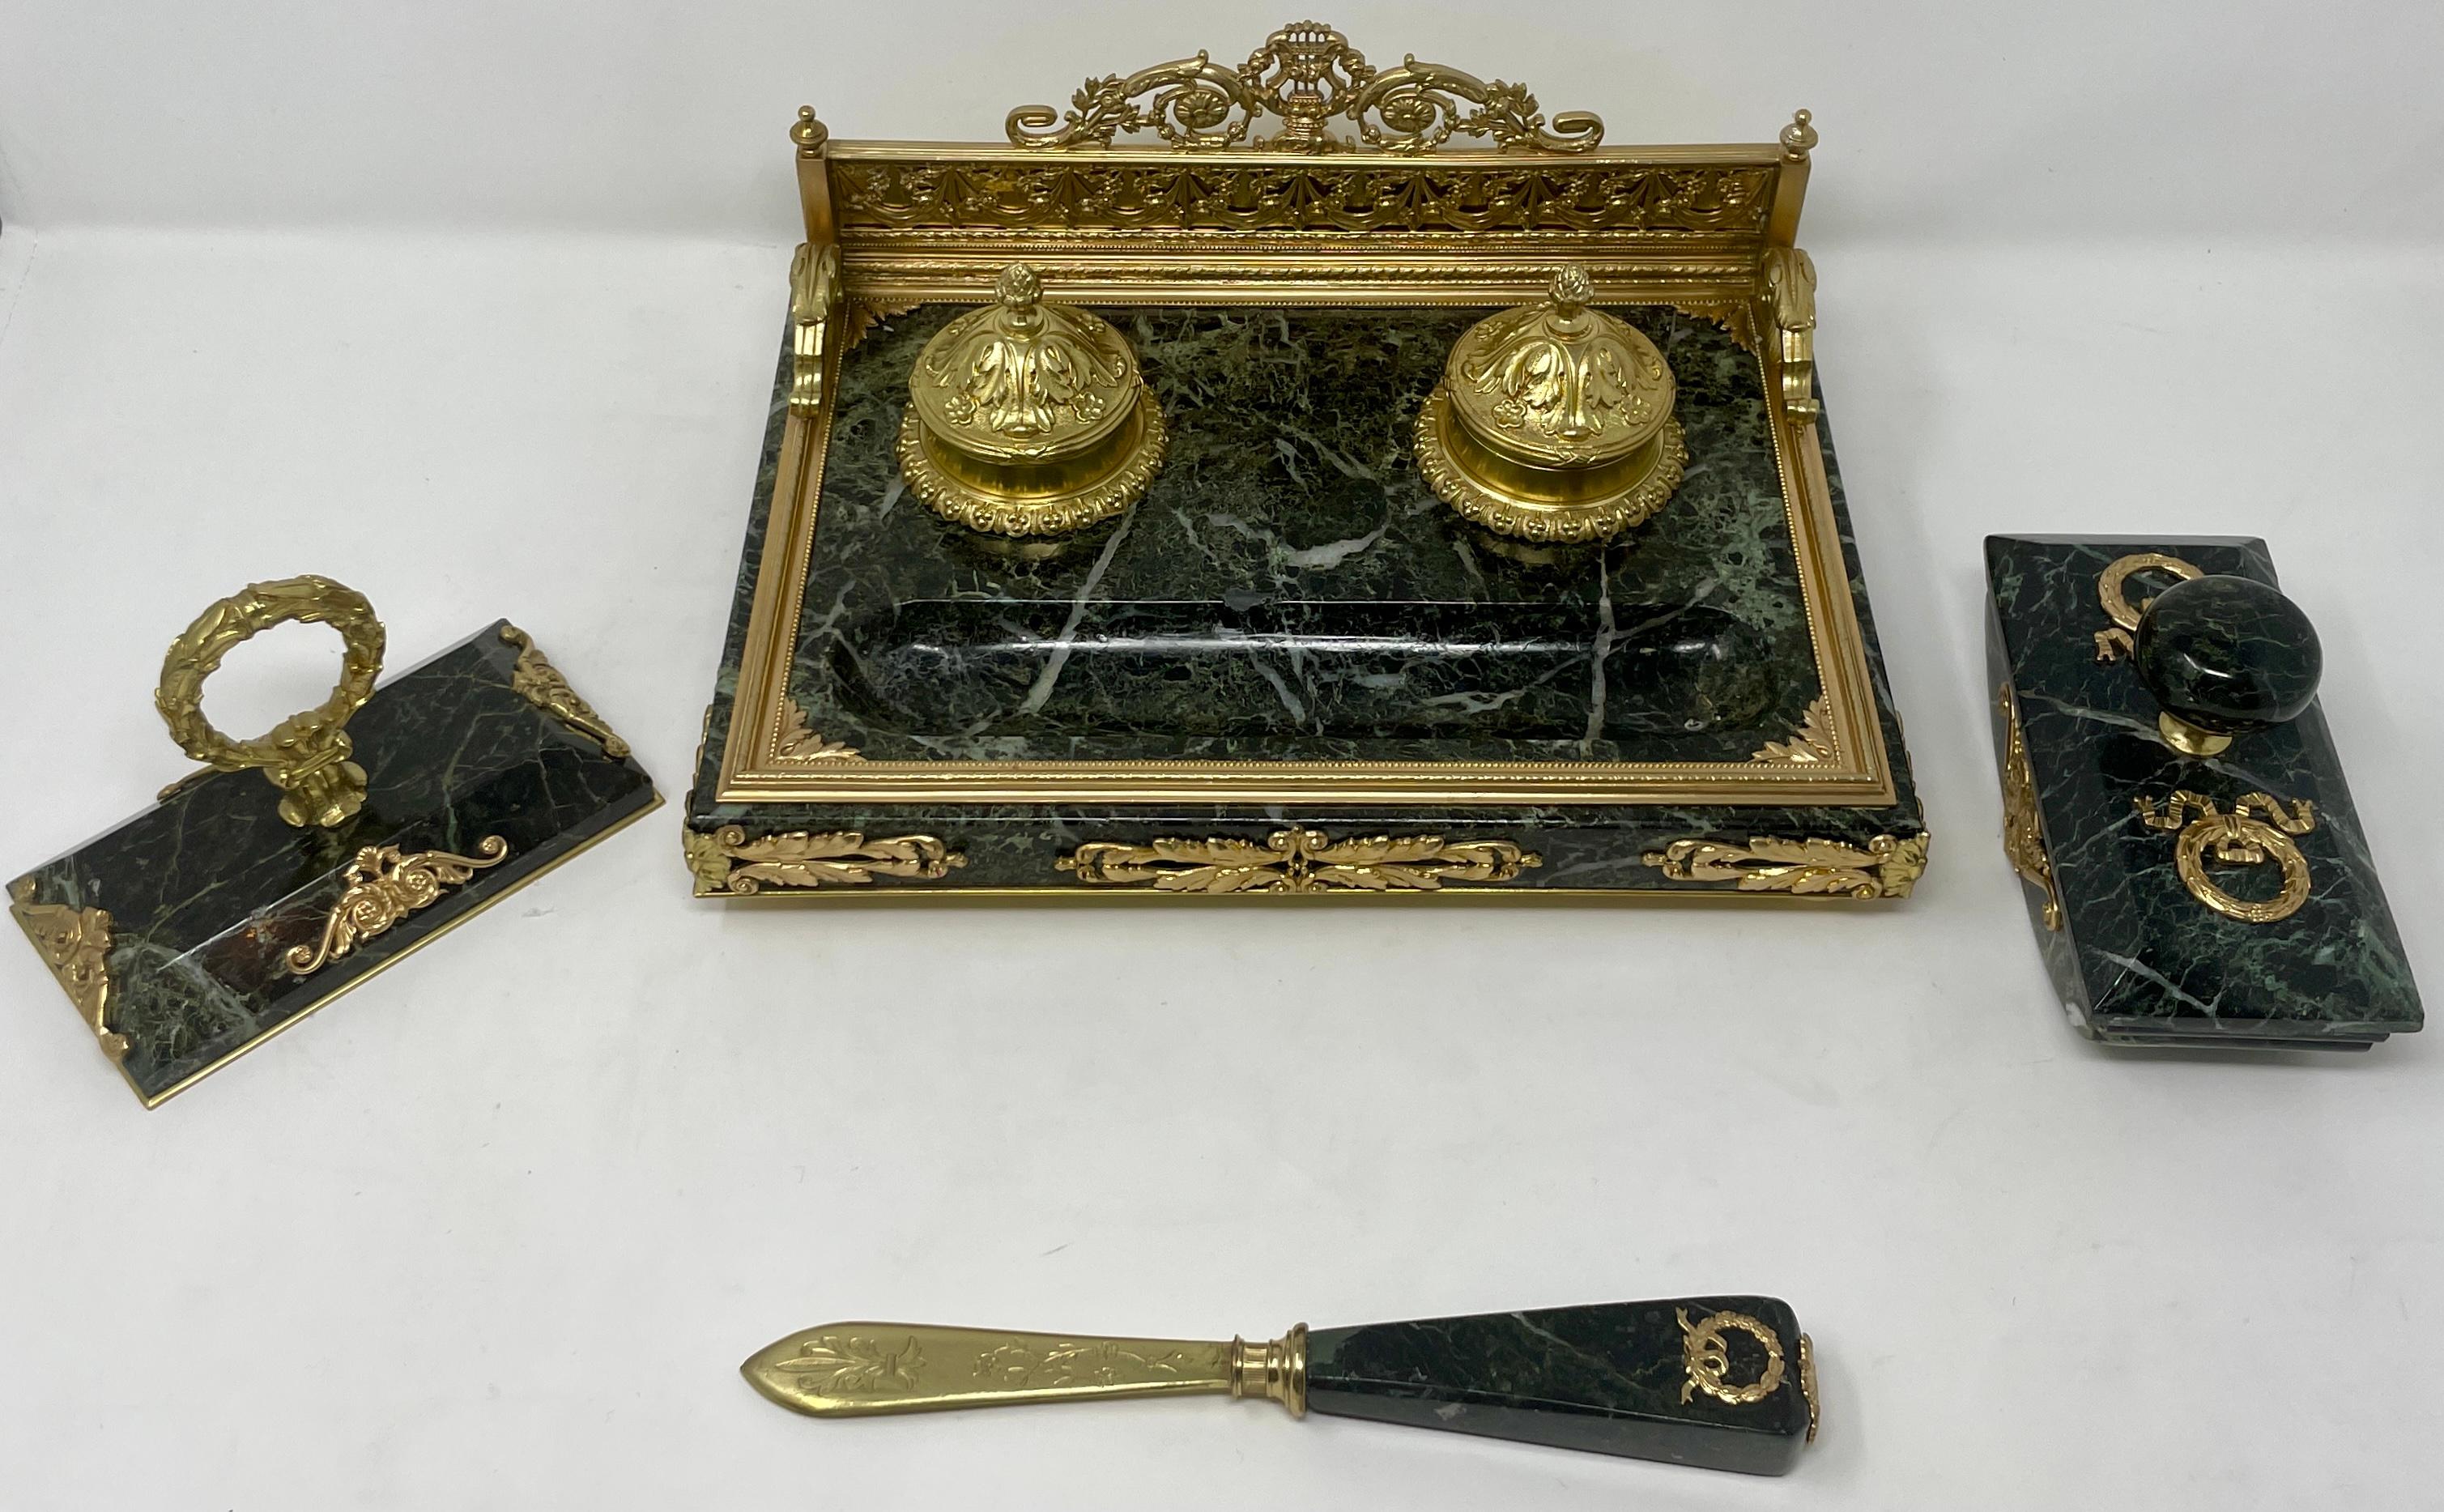 Exceptional Antique French green marble and gold bronze 4 piece inkwell desk set, circa 1875-1885.
Includes:
Inkwell: 11W x 8L x 4.75H
Paperweight (Left): 3W x 5.25L x 3.5H
Rolling Stamp (Right): 2.75W x 5.75L x 3.25H
Letter Opener: 1.25W x